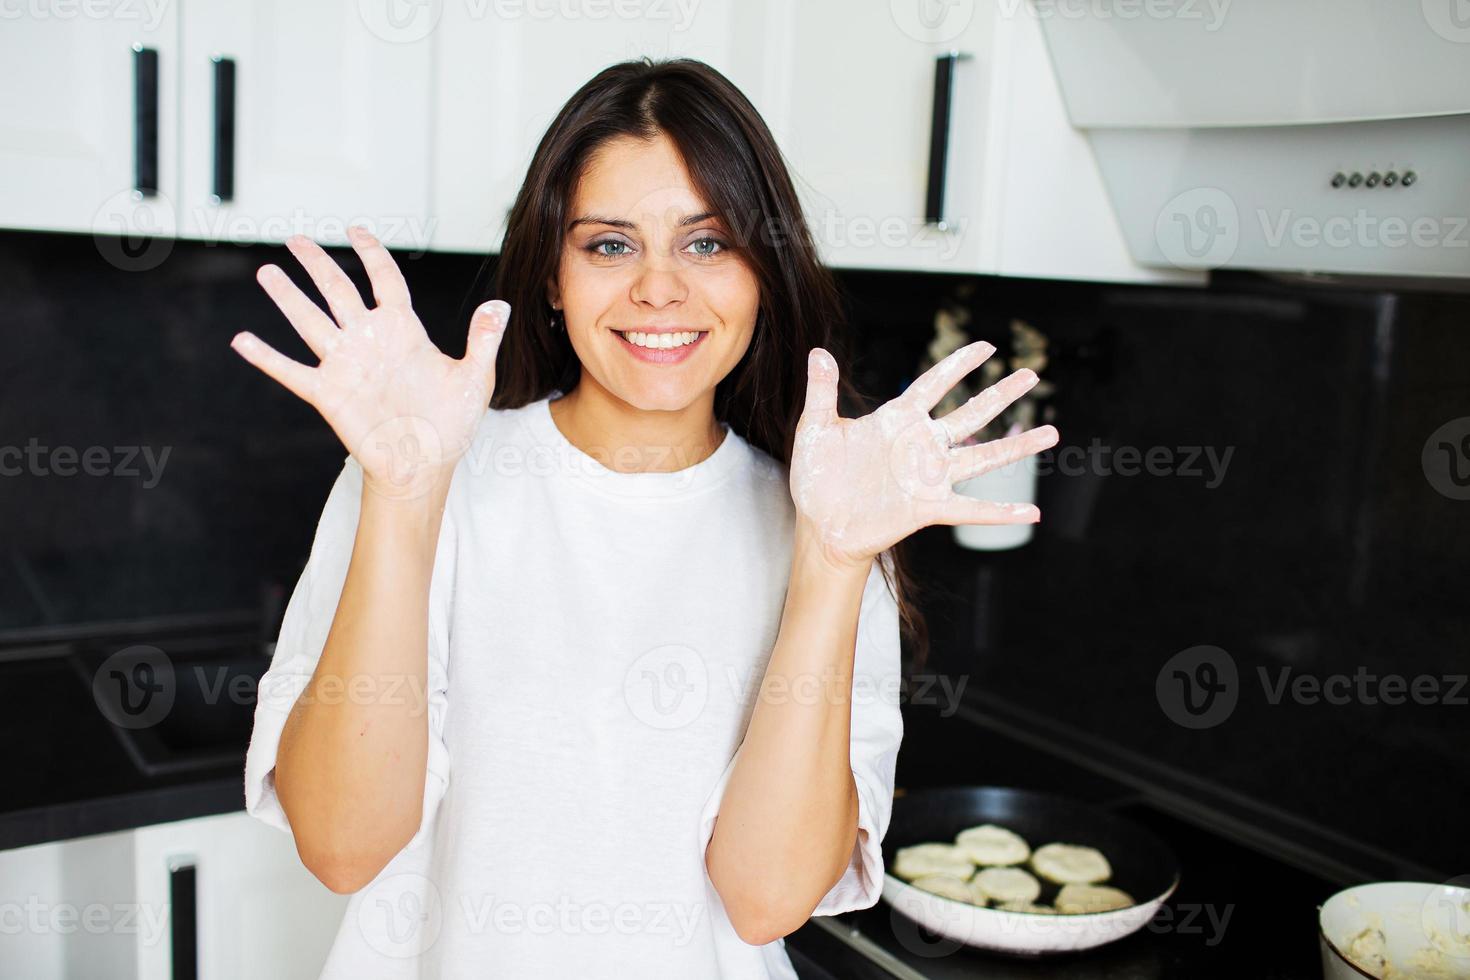 Young woman shows us her hands, smeared with flour photo